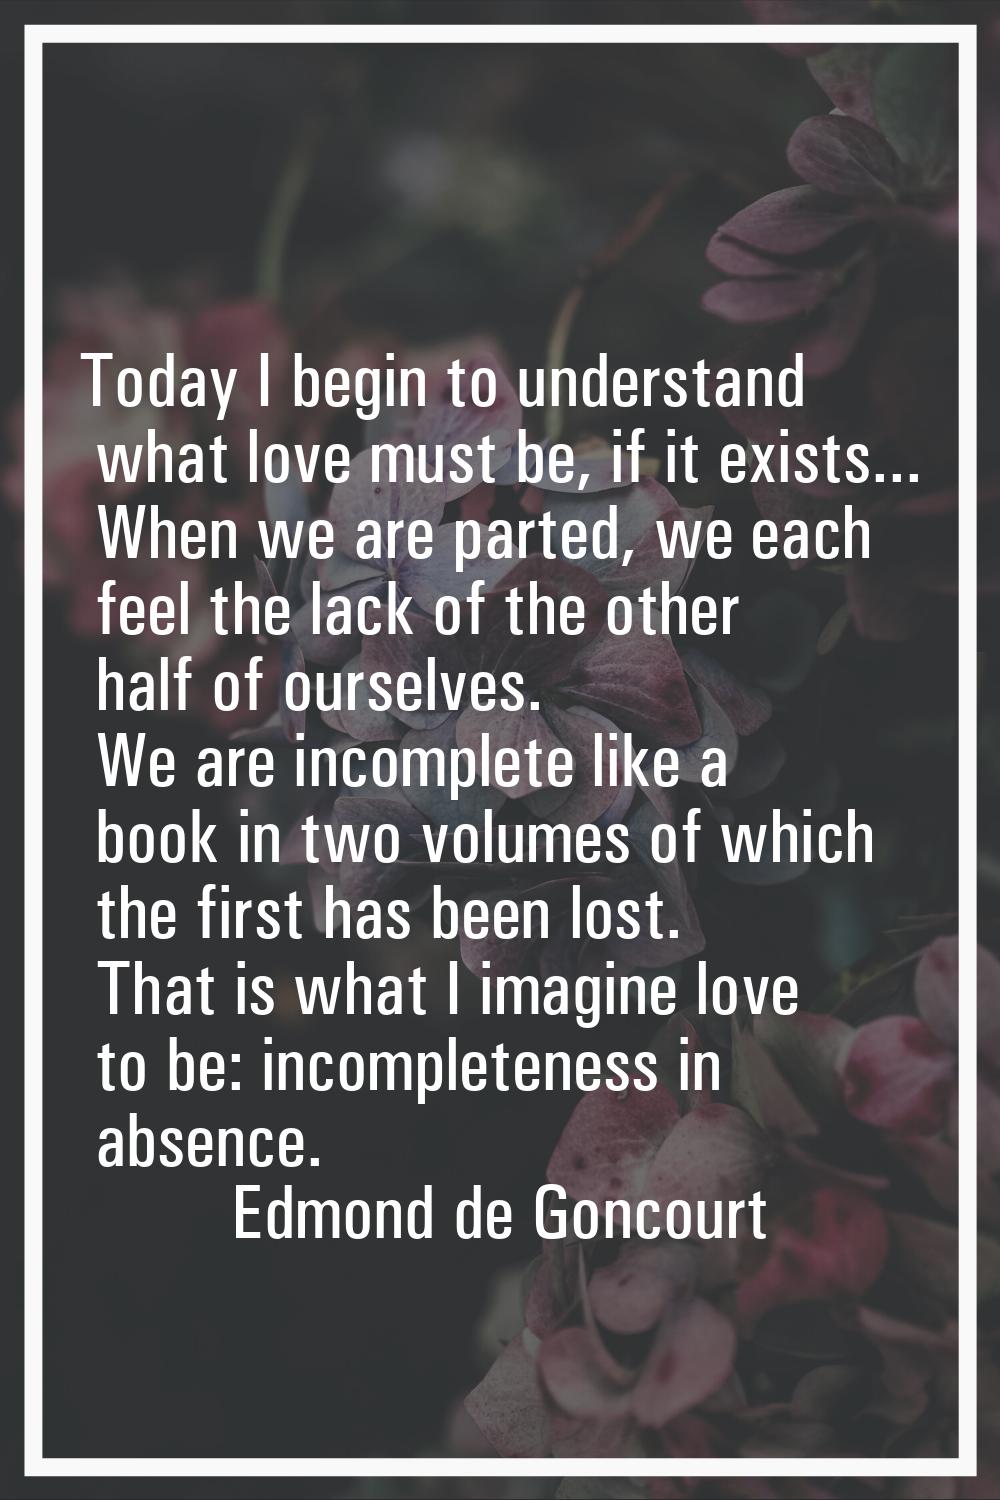 Today I begin to understand what love must be, if it exists... When we are parted, we each feel the